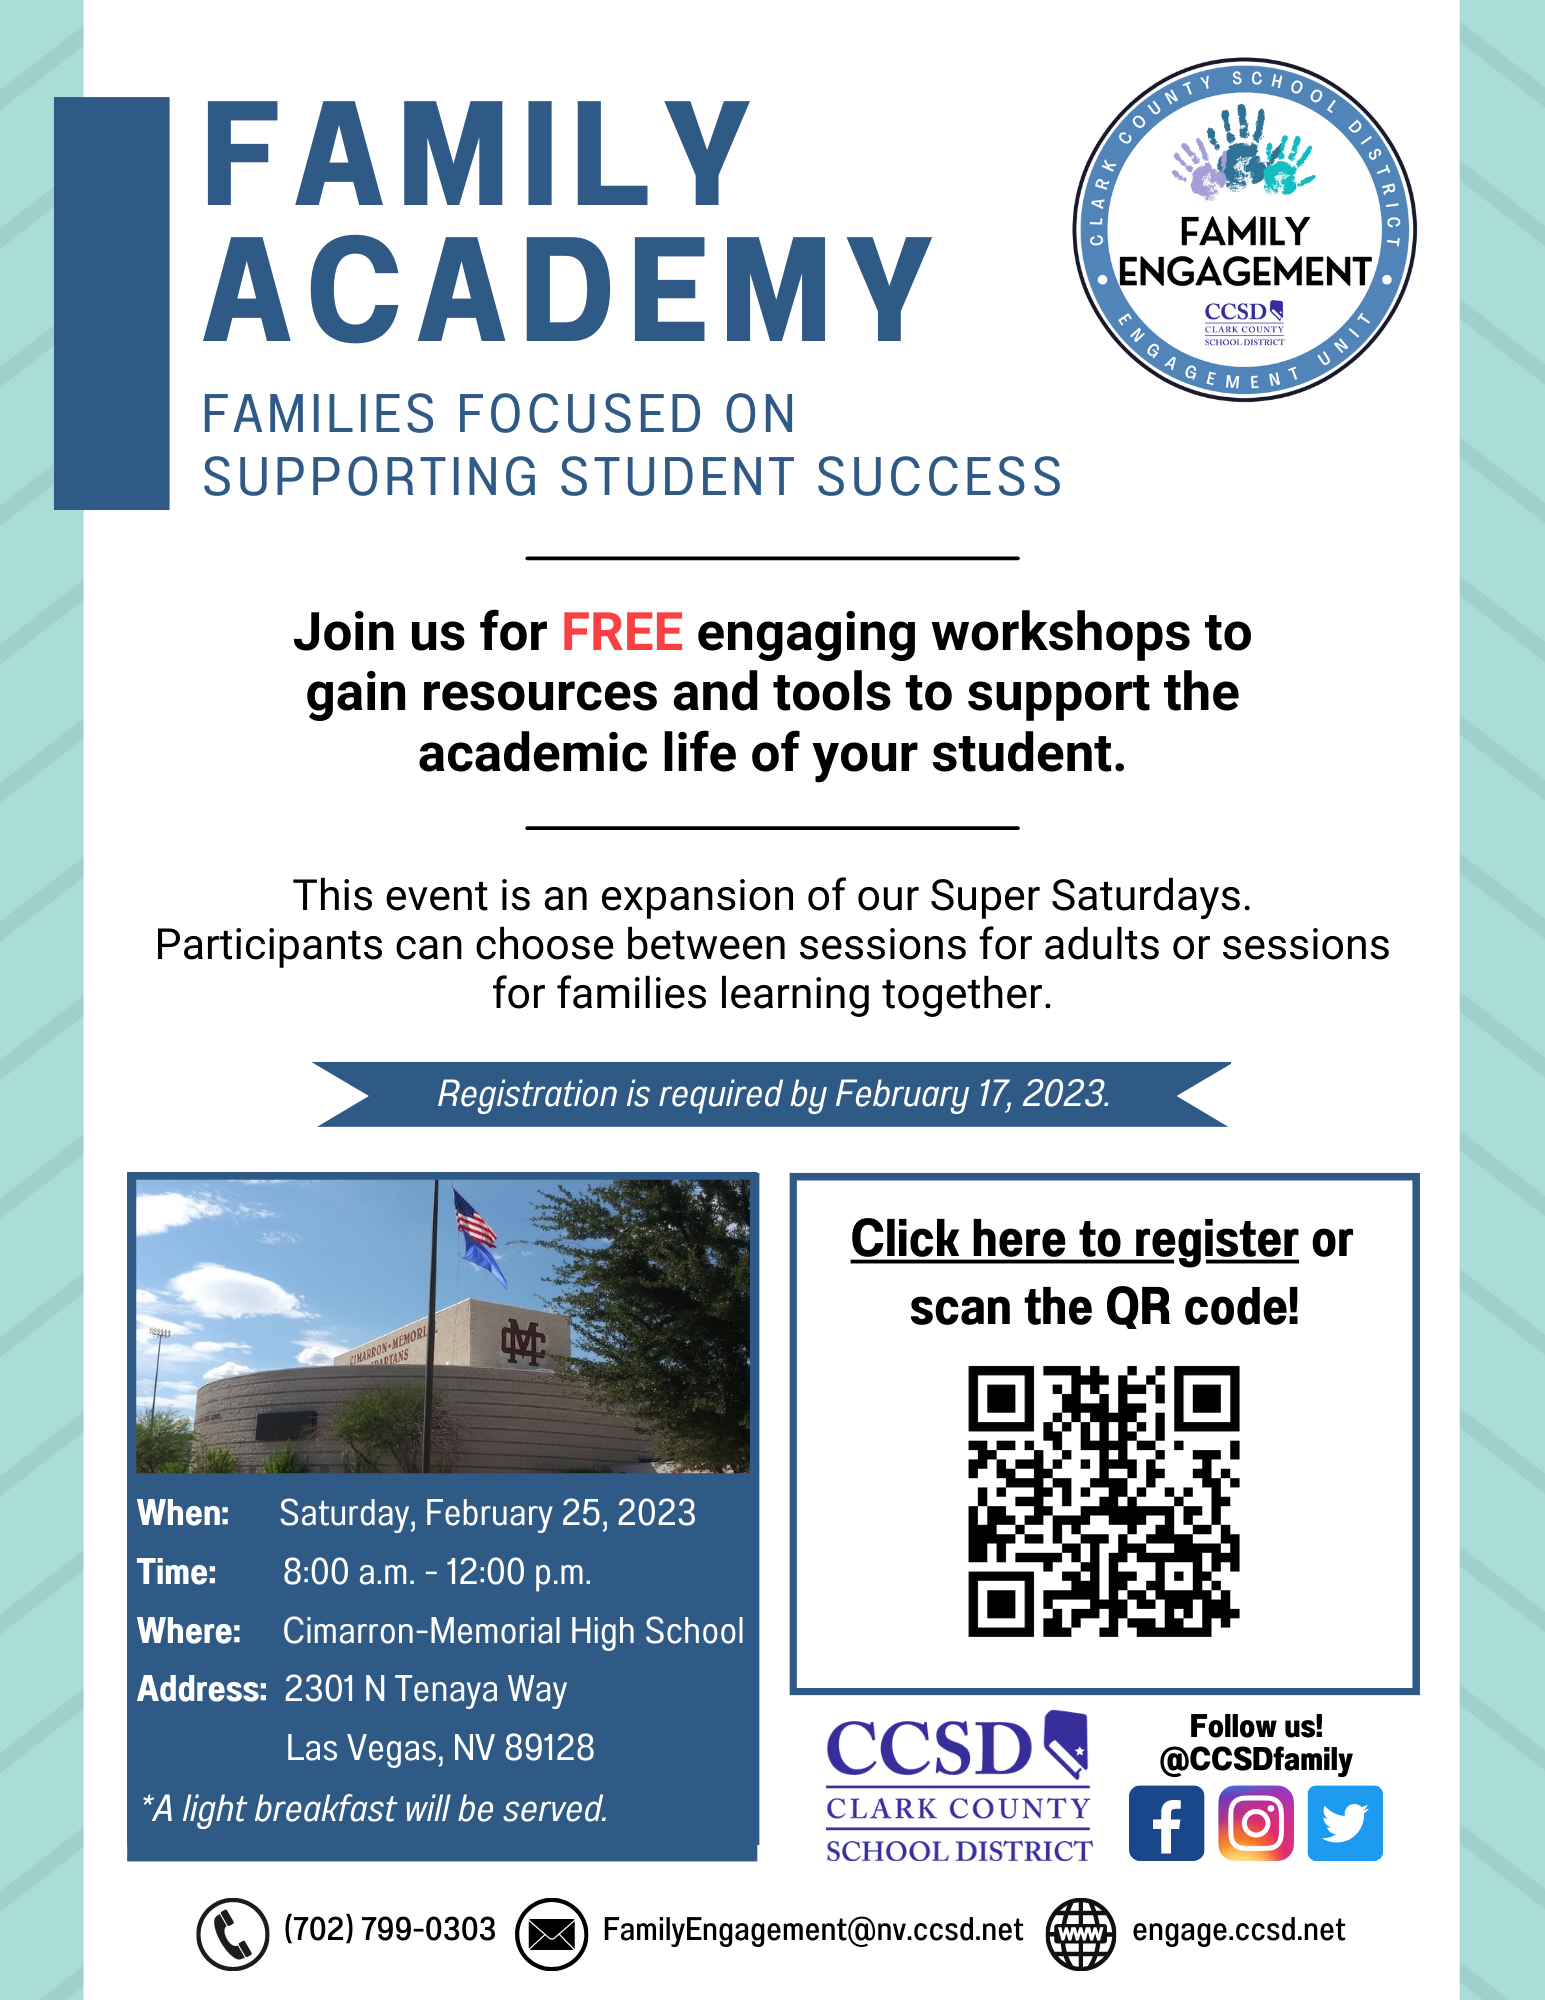 Blue and white flyer for Family Academy event.